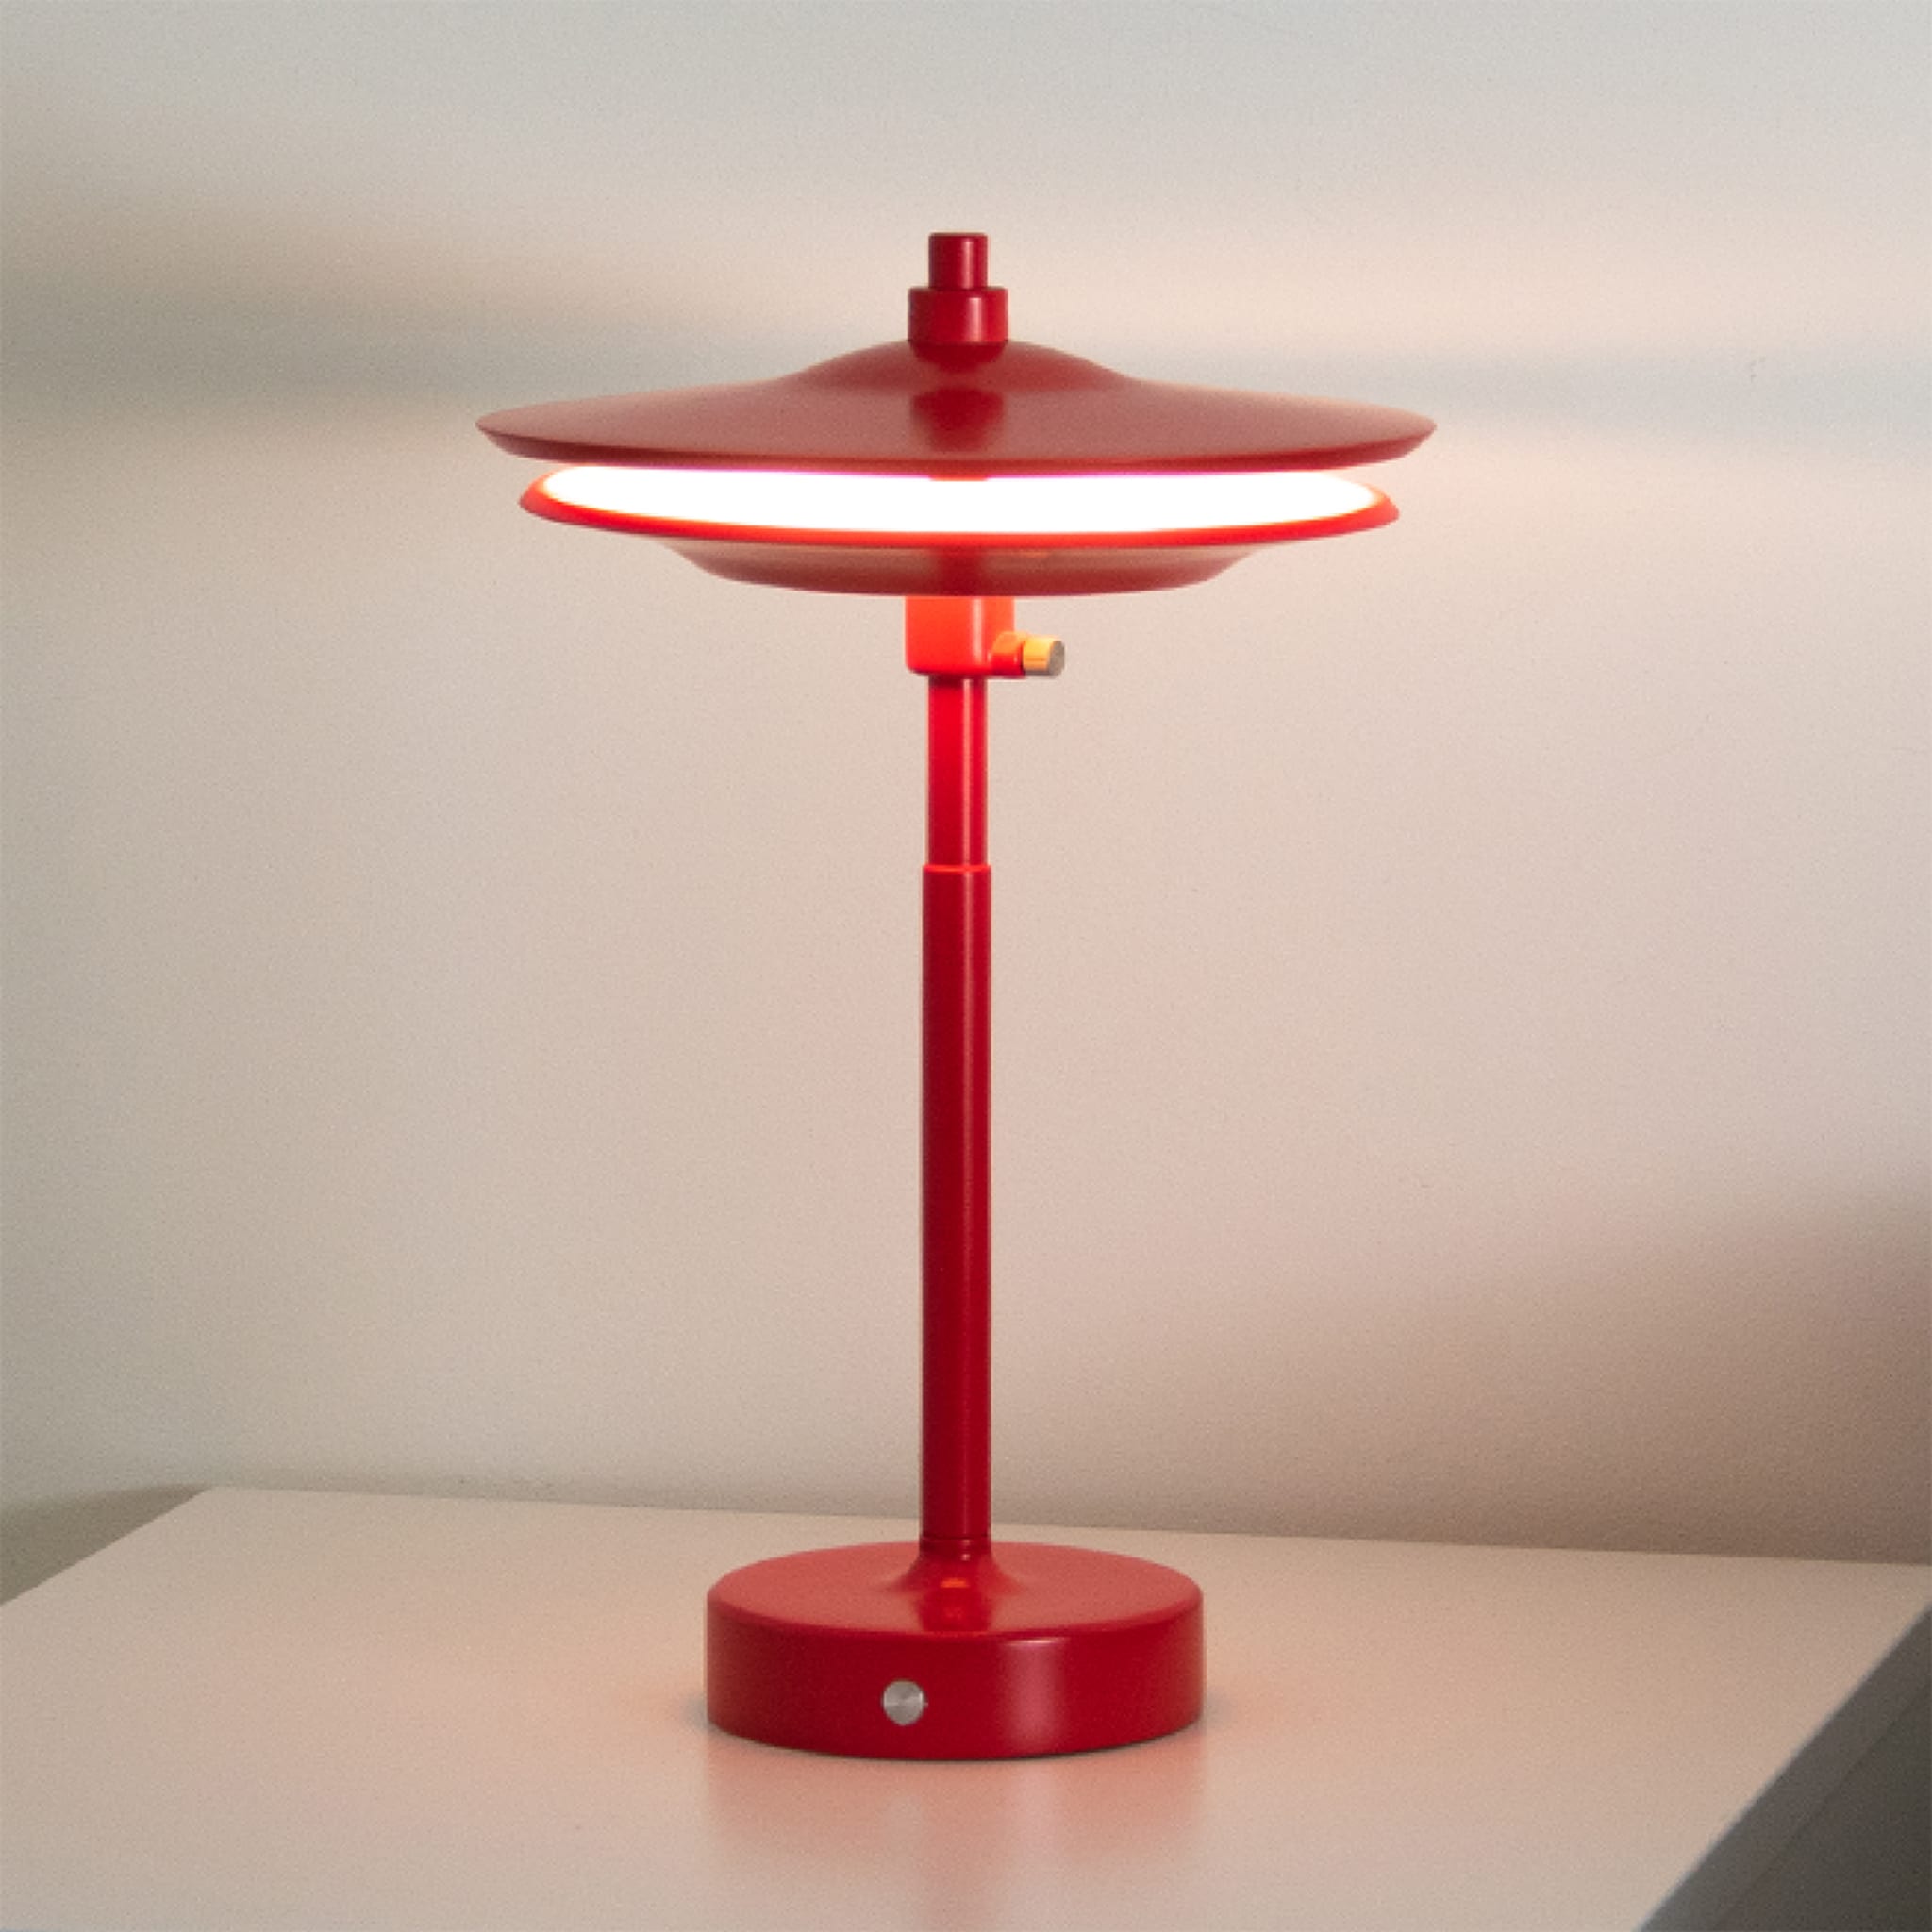 Drum Red Rechargeable Table Lamp by Albore Design - Alternative view 1